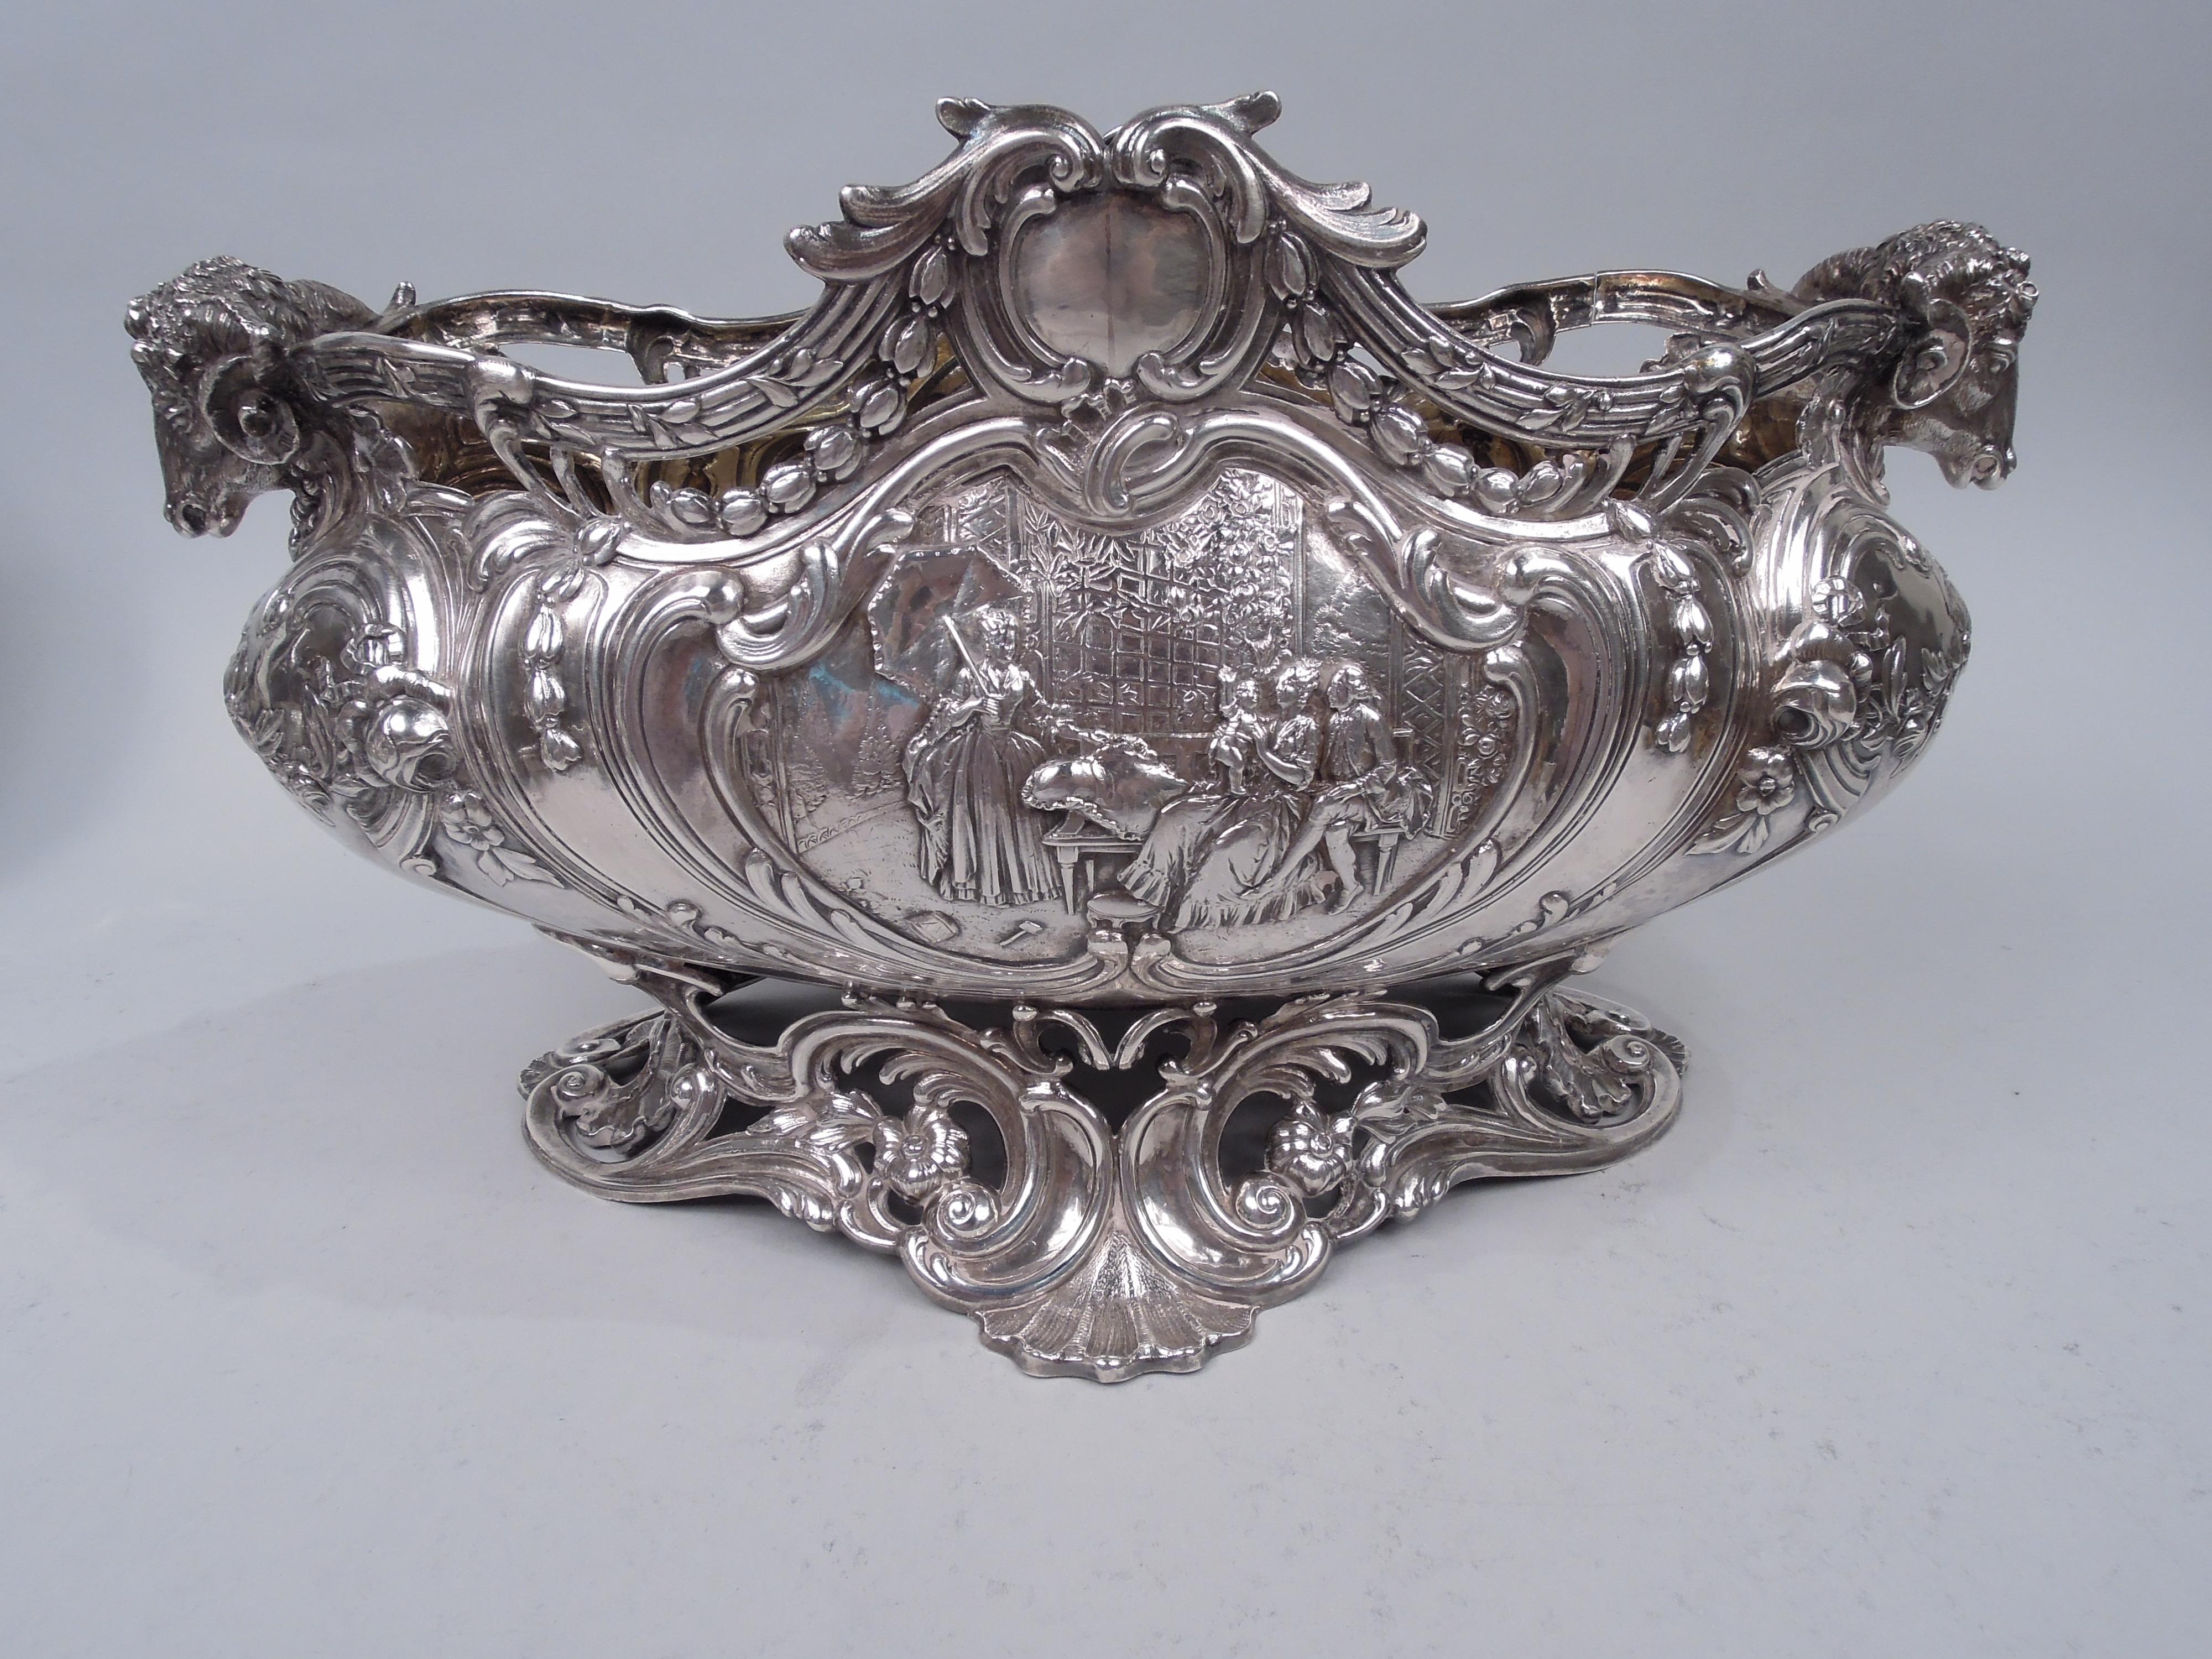 Rococo silver centerpiece bowl. Made by B. Neresheimer & Söhne in Hanau, Germany, and imported to England in 1905 by Berthold Muller in Chester. Bellied and ovoid with cast ram’s head end handles. Gilt-washed interior. Chased and engraved ornament.